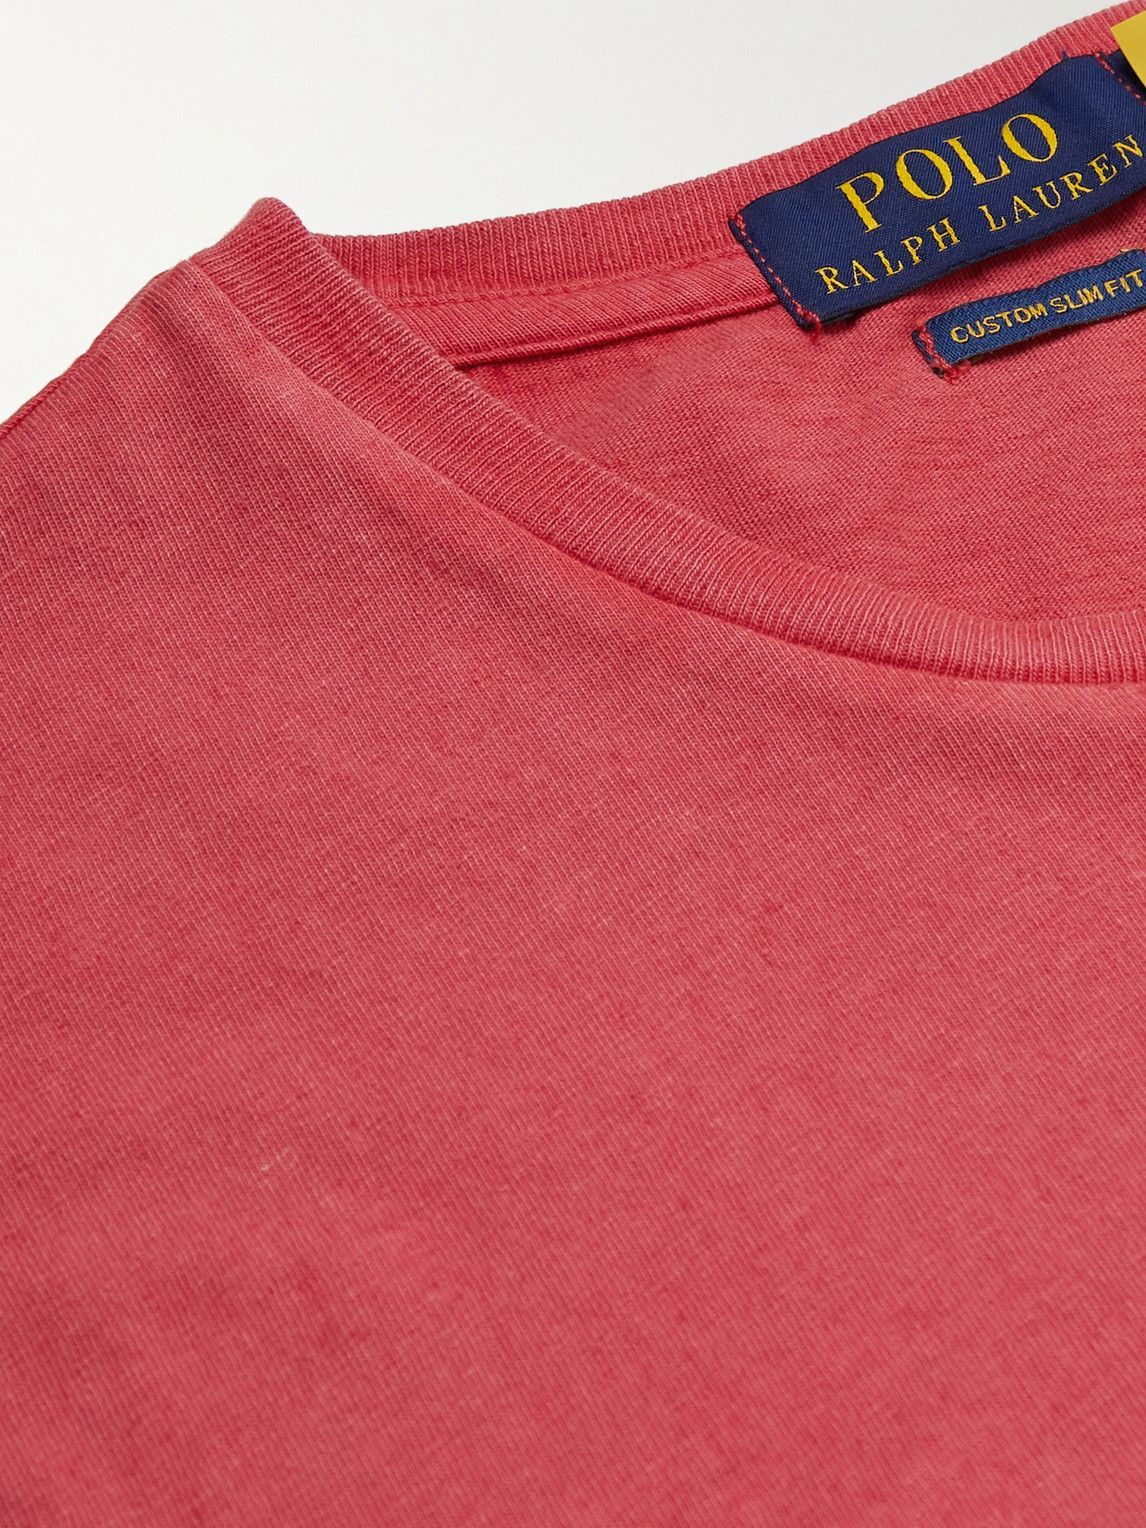 Polo Ralph Lauren - Slim-Fit Logo-Embroidered Cotton and Linen-Blend T-Shirt - Red